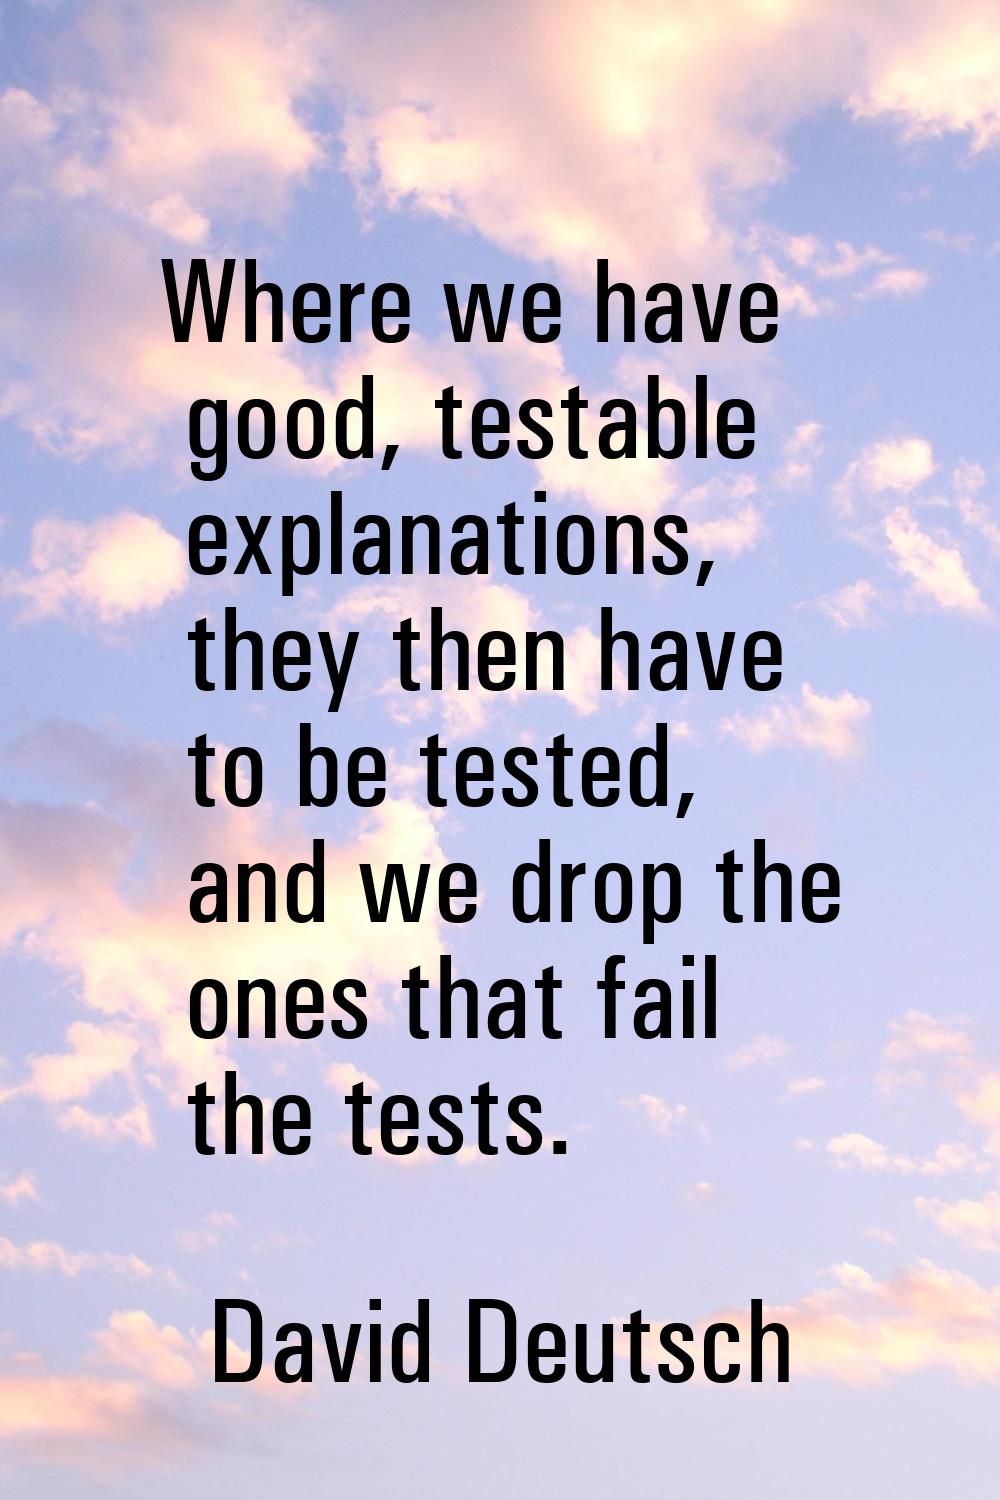 Where we have good, testable explanations, they then have to be tested, and we drop the ones that f